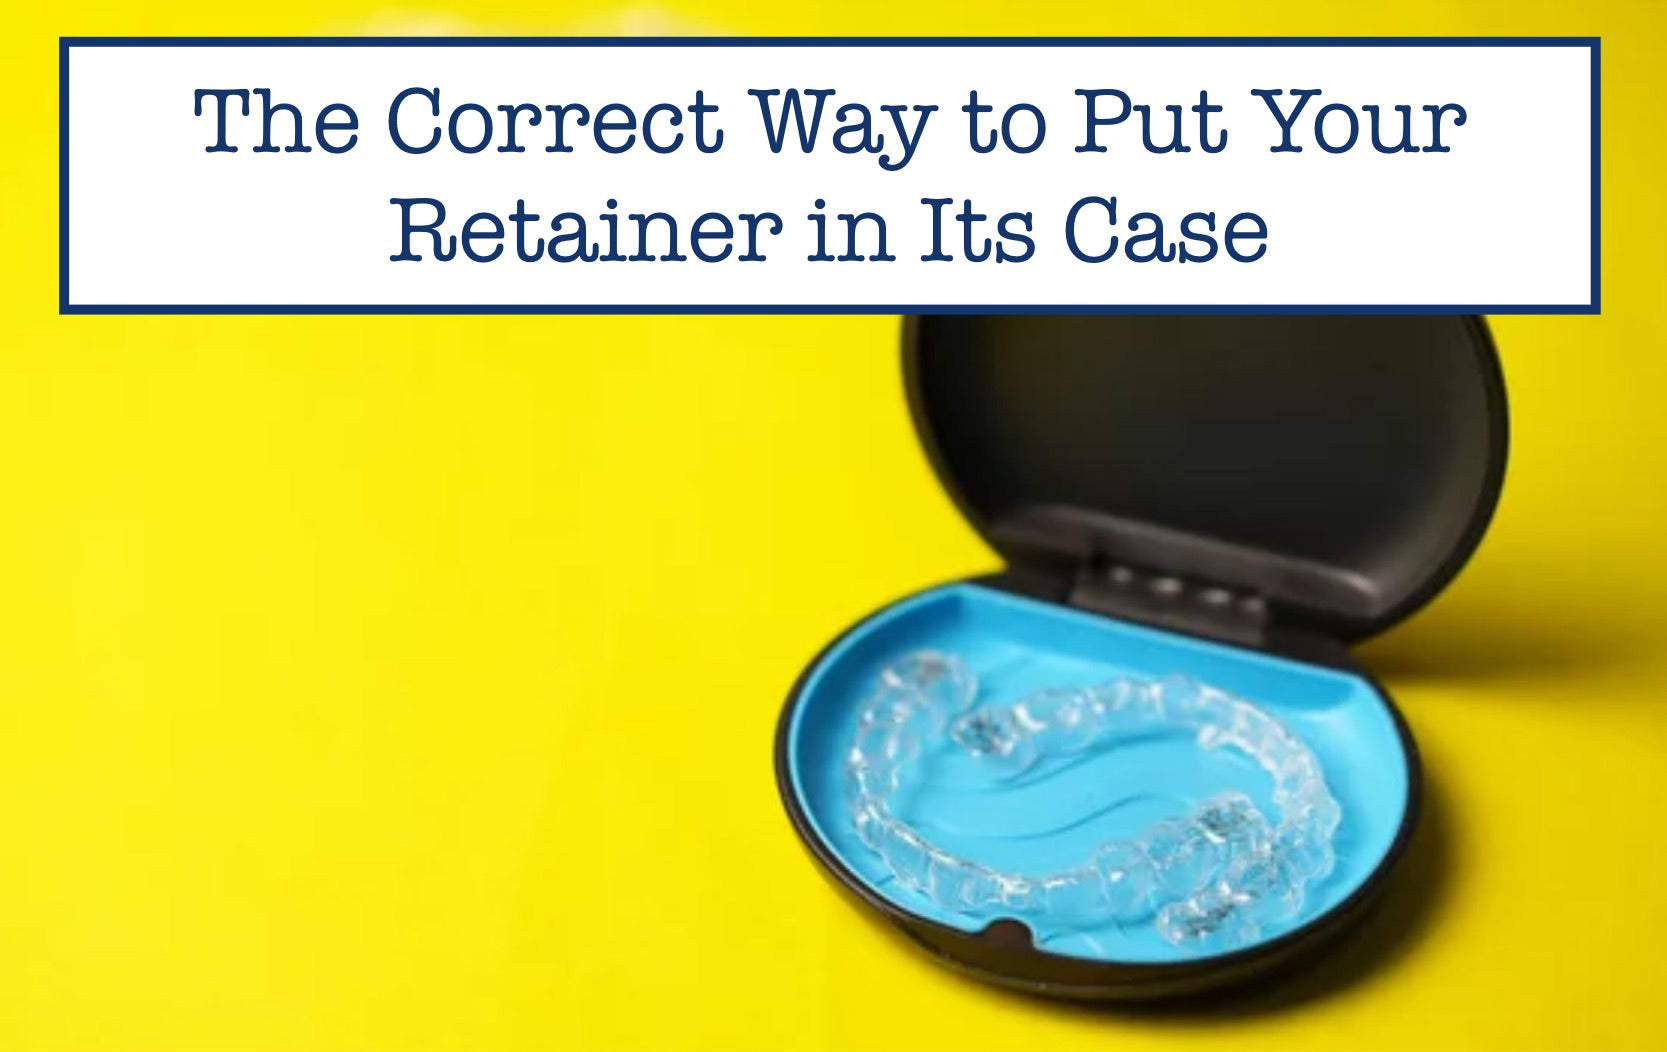 The Correct Way to Put Your Retainer in Its Case